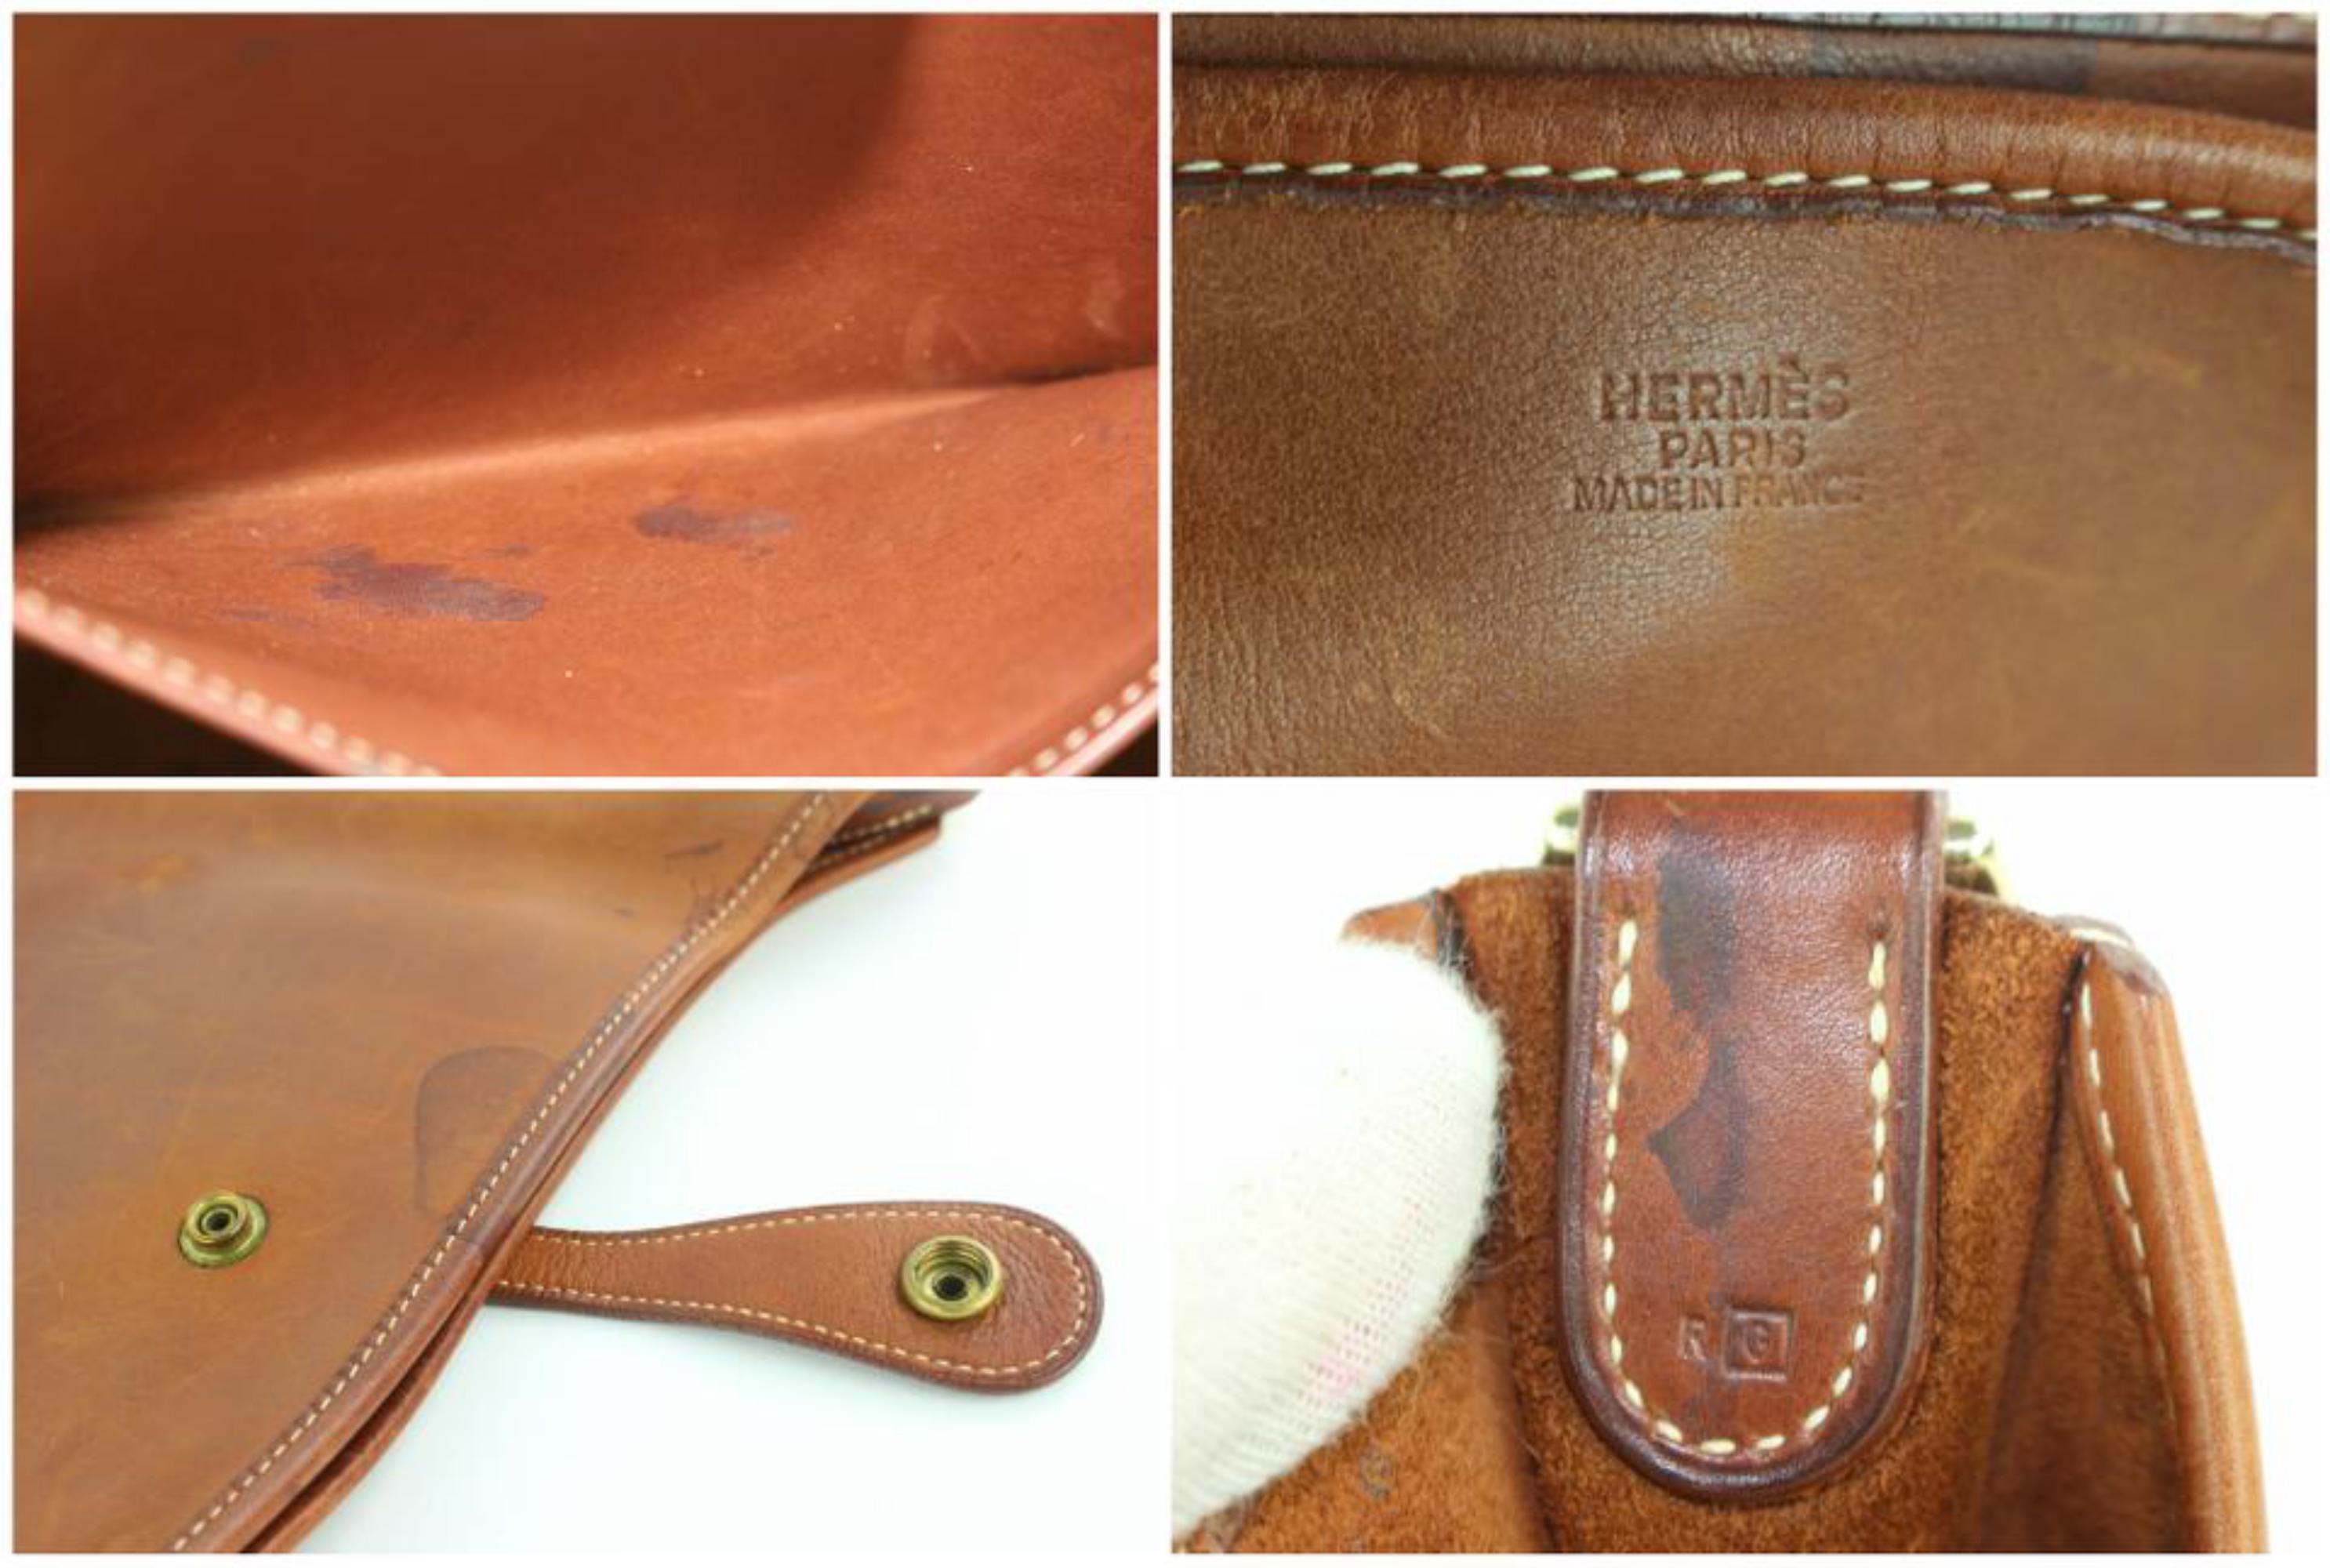 Hermès Evelyne 2hz1130 Brown Leather Messenger Bag In Fair Condition For Sale In Forest Hills, NY